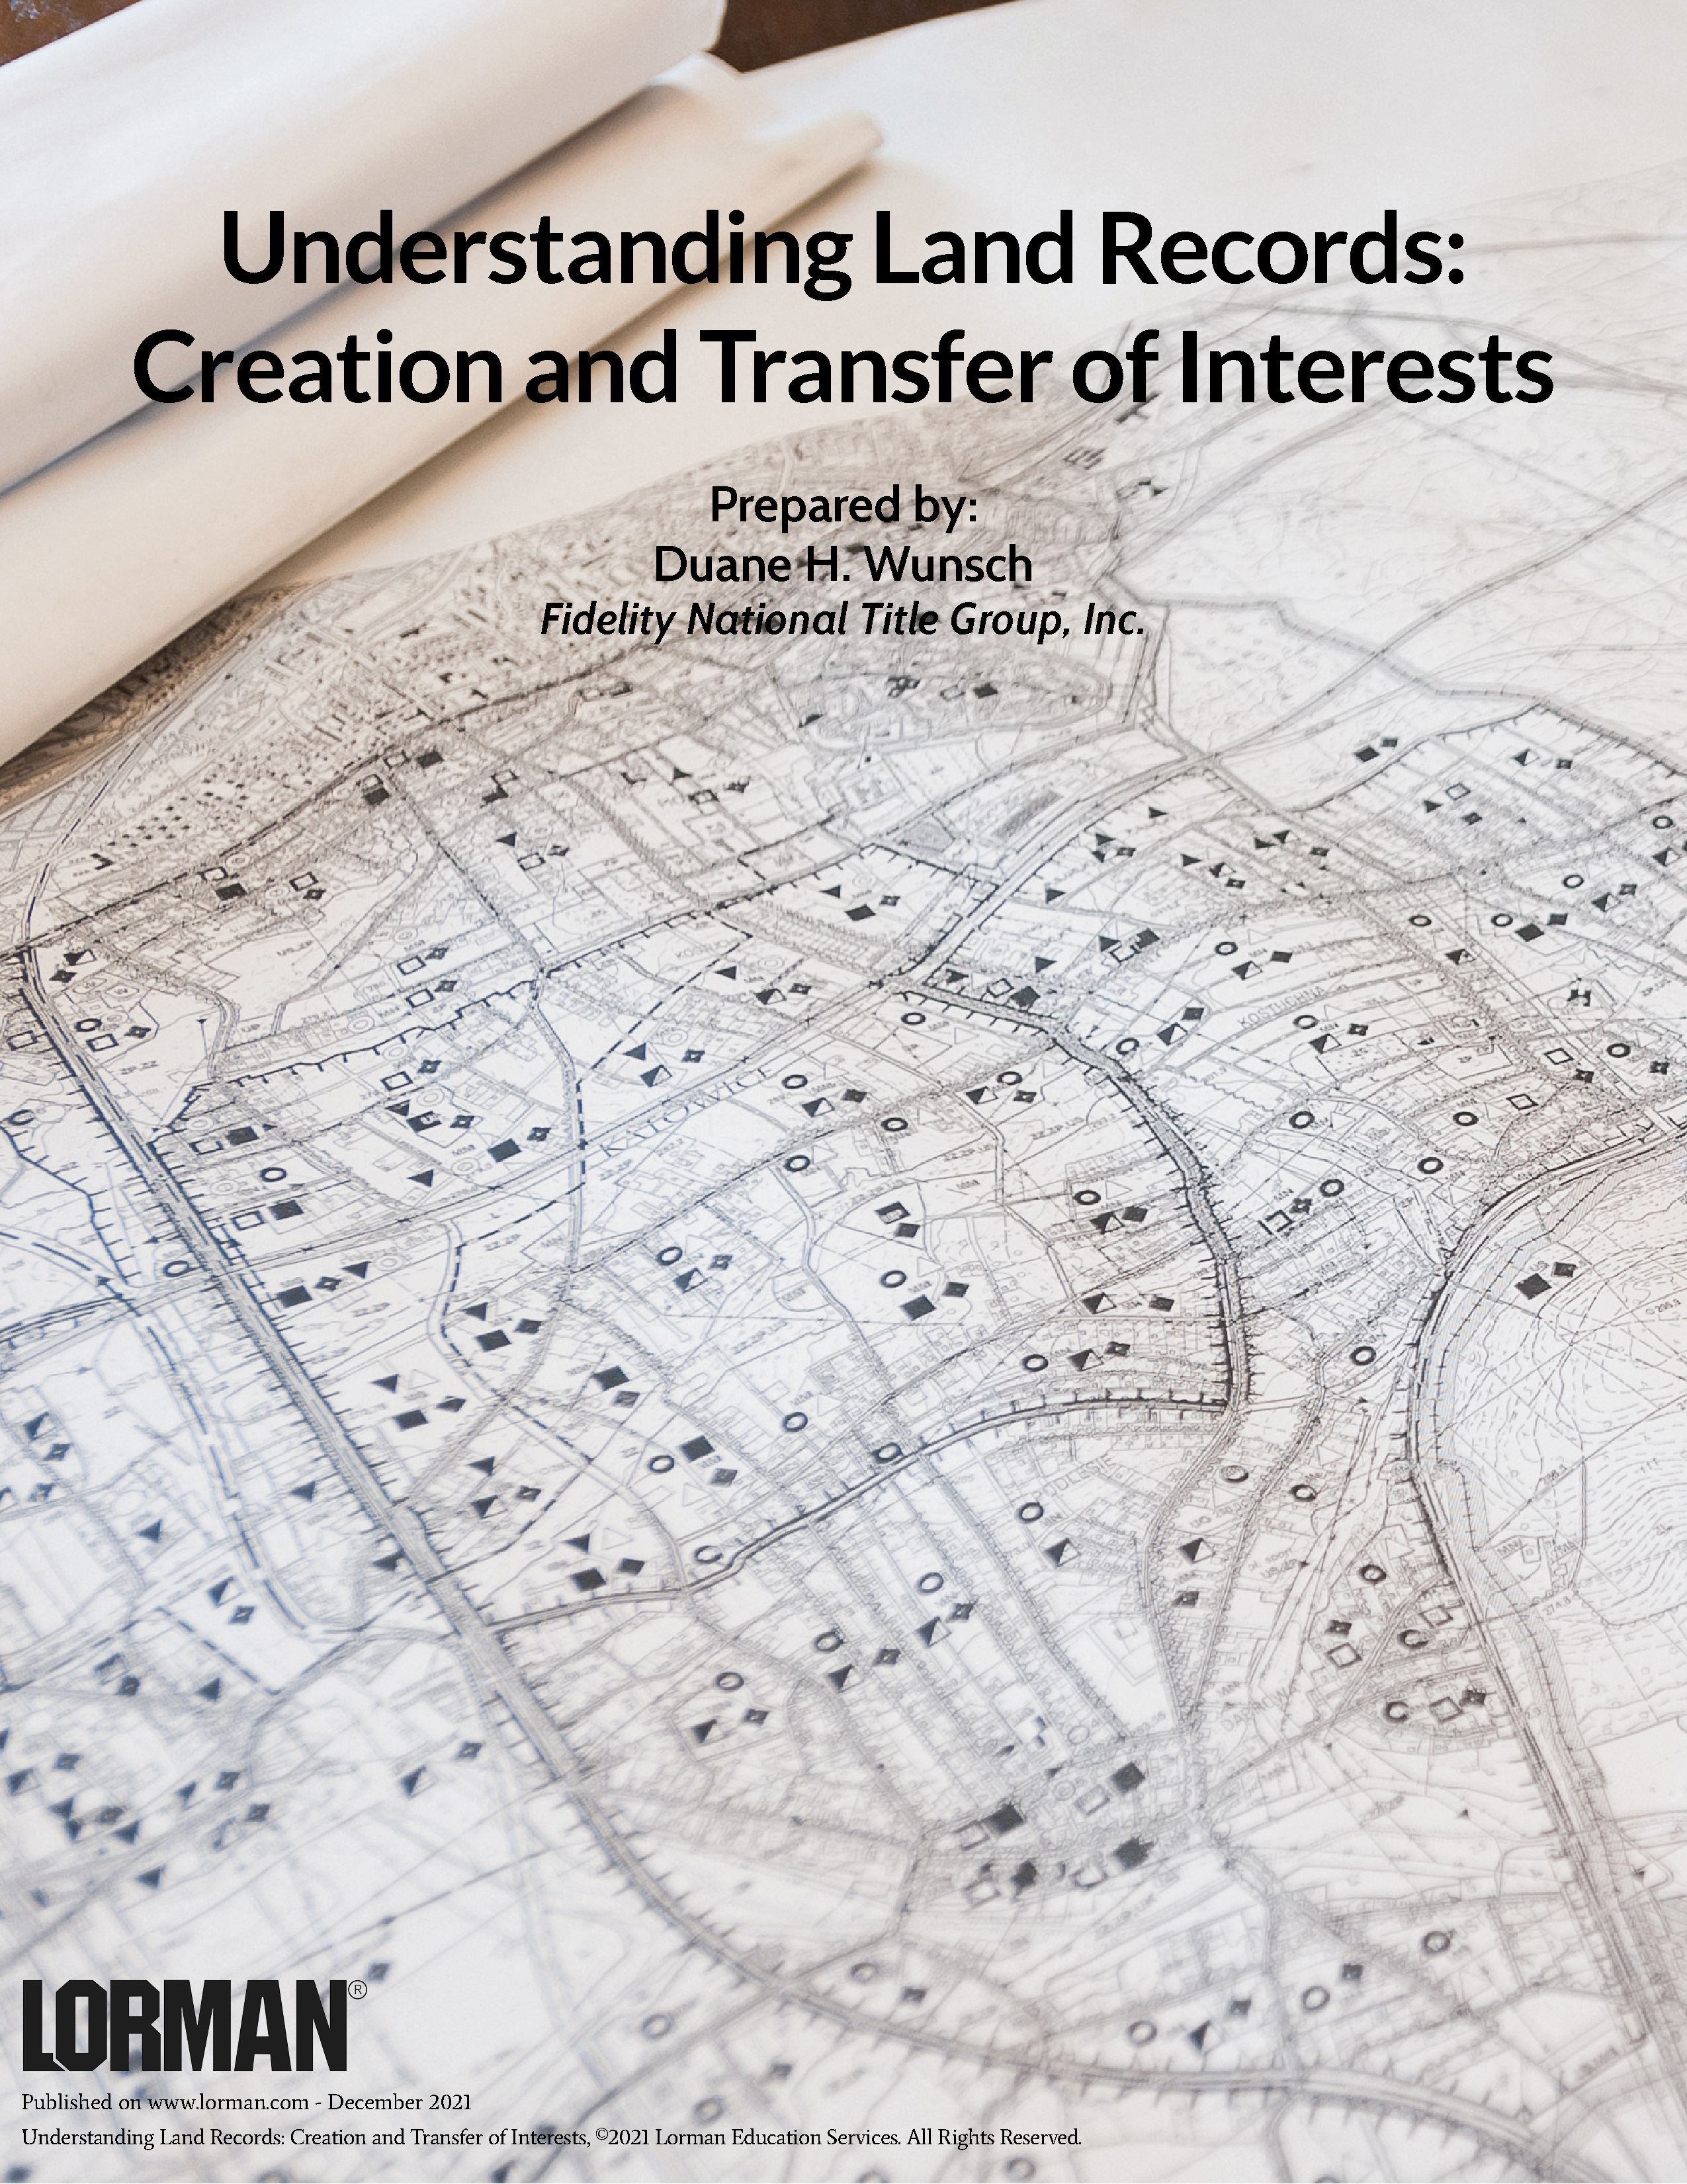 Understanding Land Records: Creation and Transfer of Interests